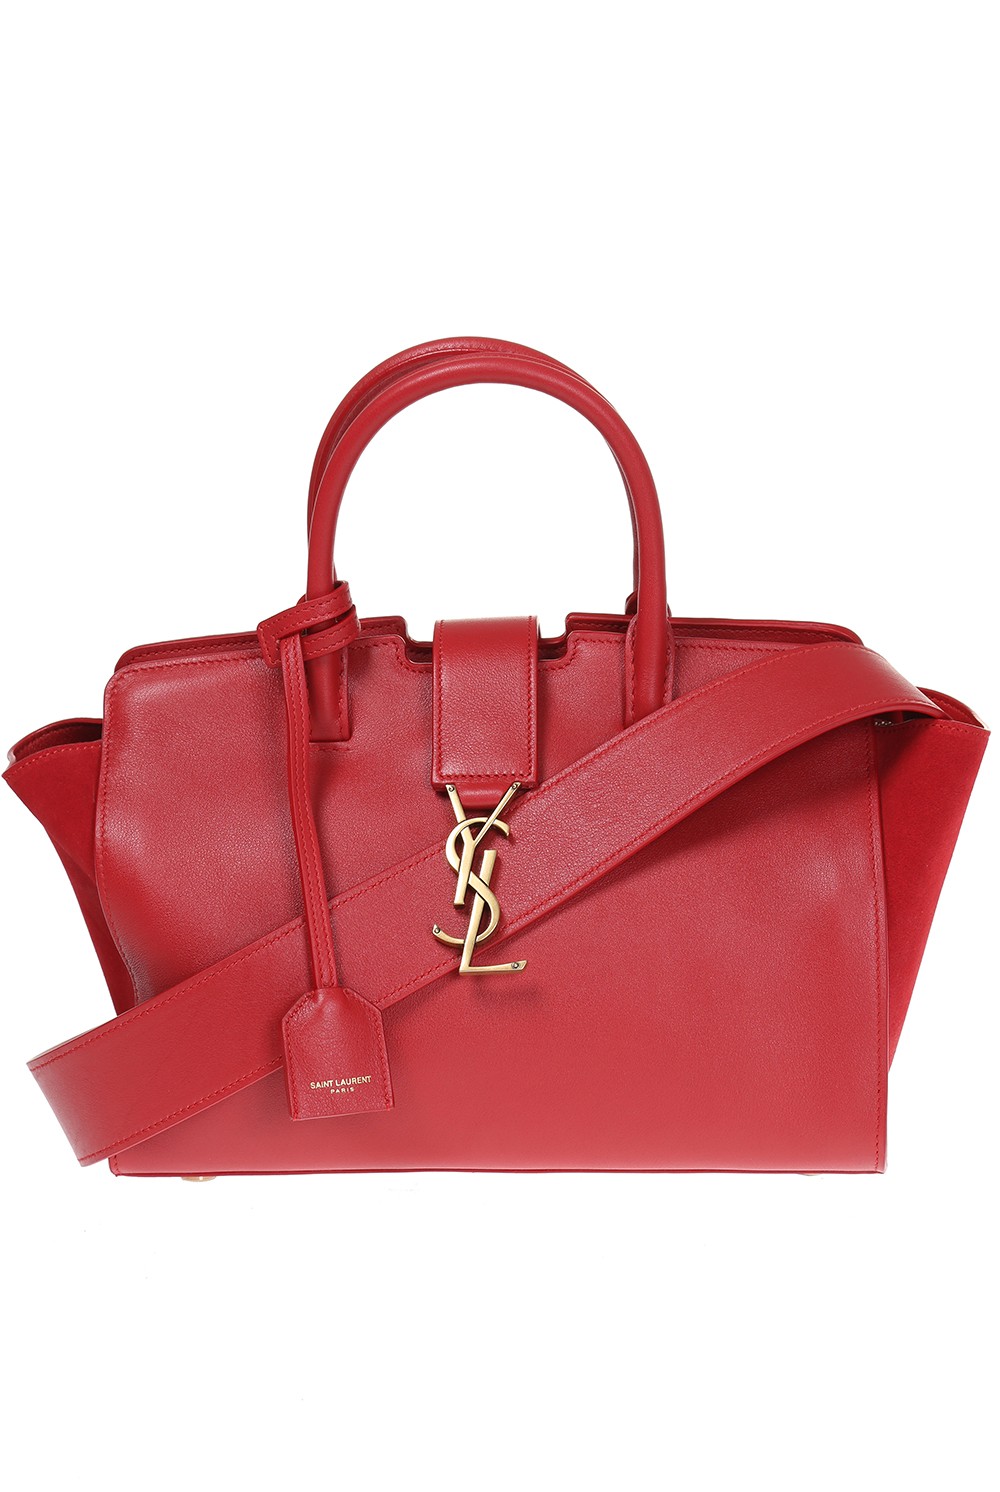 YSL Monogram Baby Downtown Cabas Burgundy [Consignment]